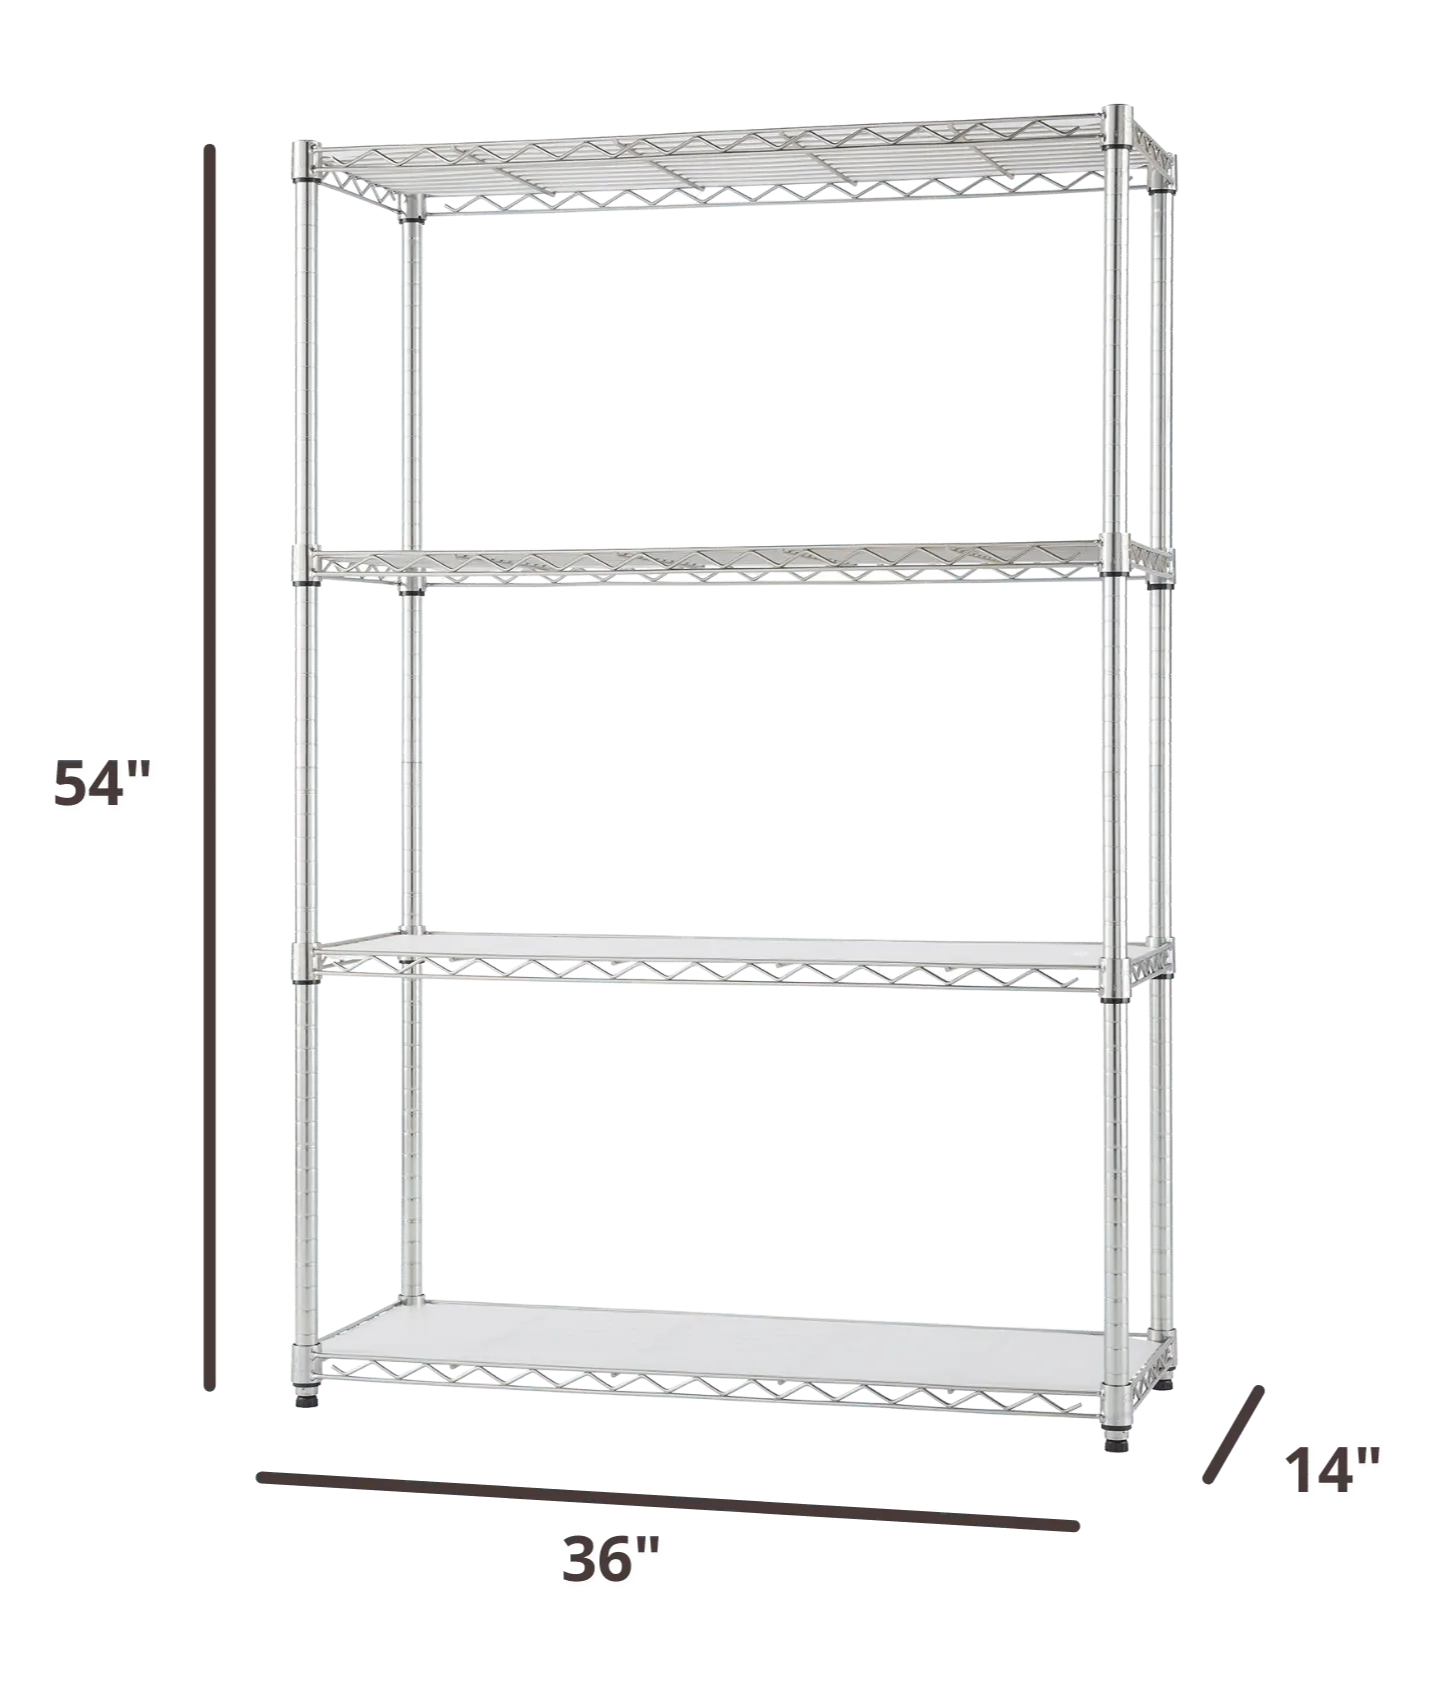 54 inches tall by 36 inches wide chrome wire shelving rack